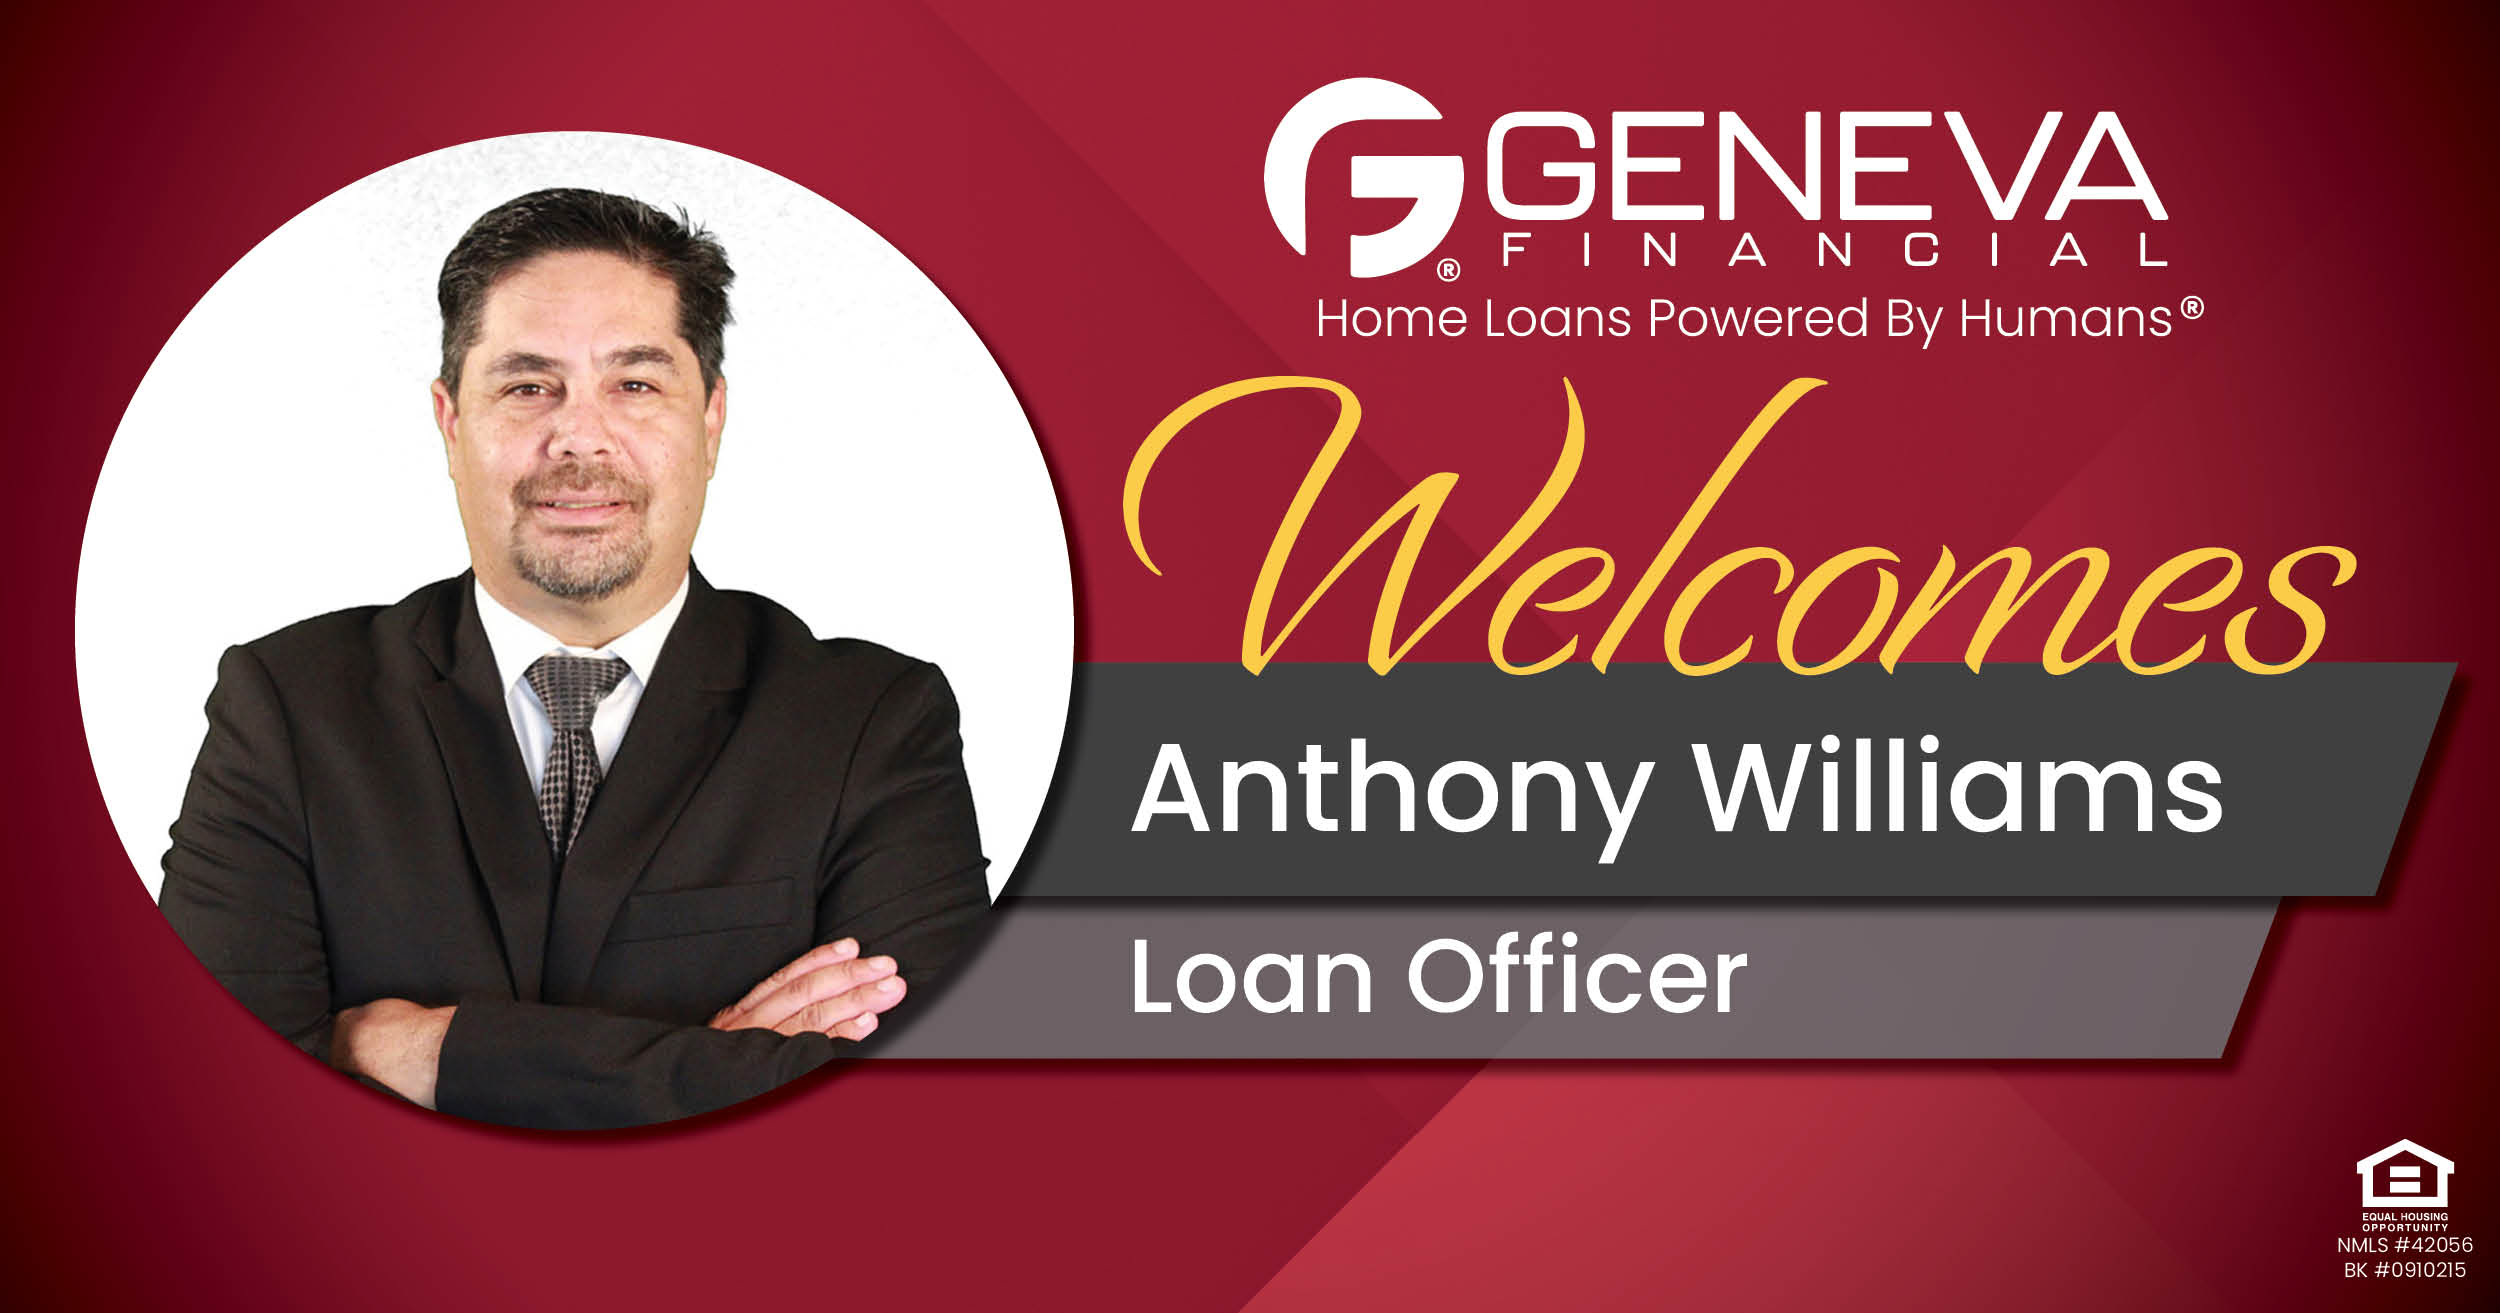 Geneva Financial Welcomes New Loan Officer Anthony Williams to California Market – Home Loans Powered by Humans®.